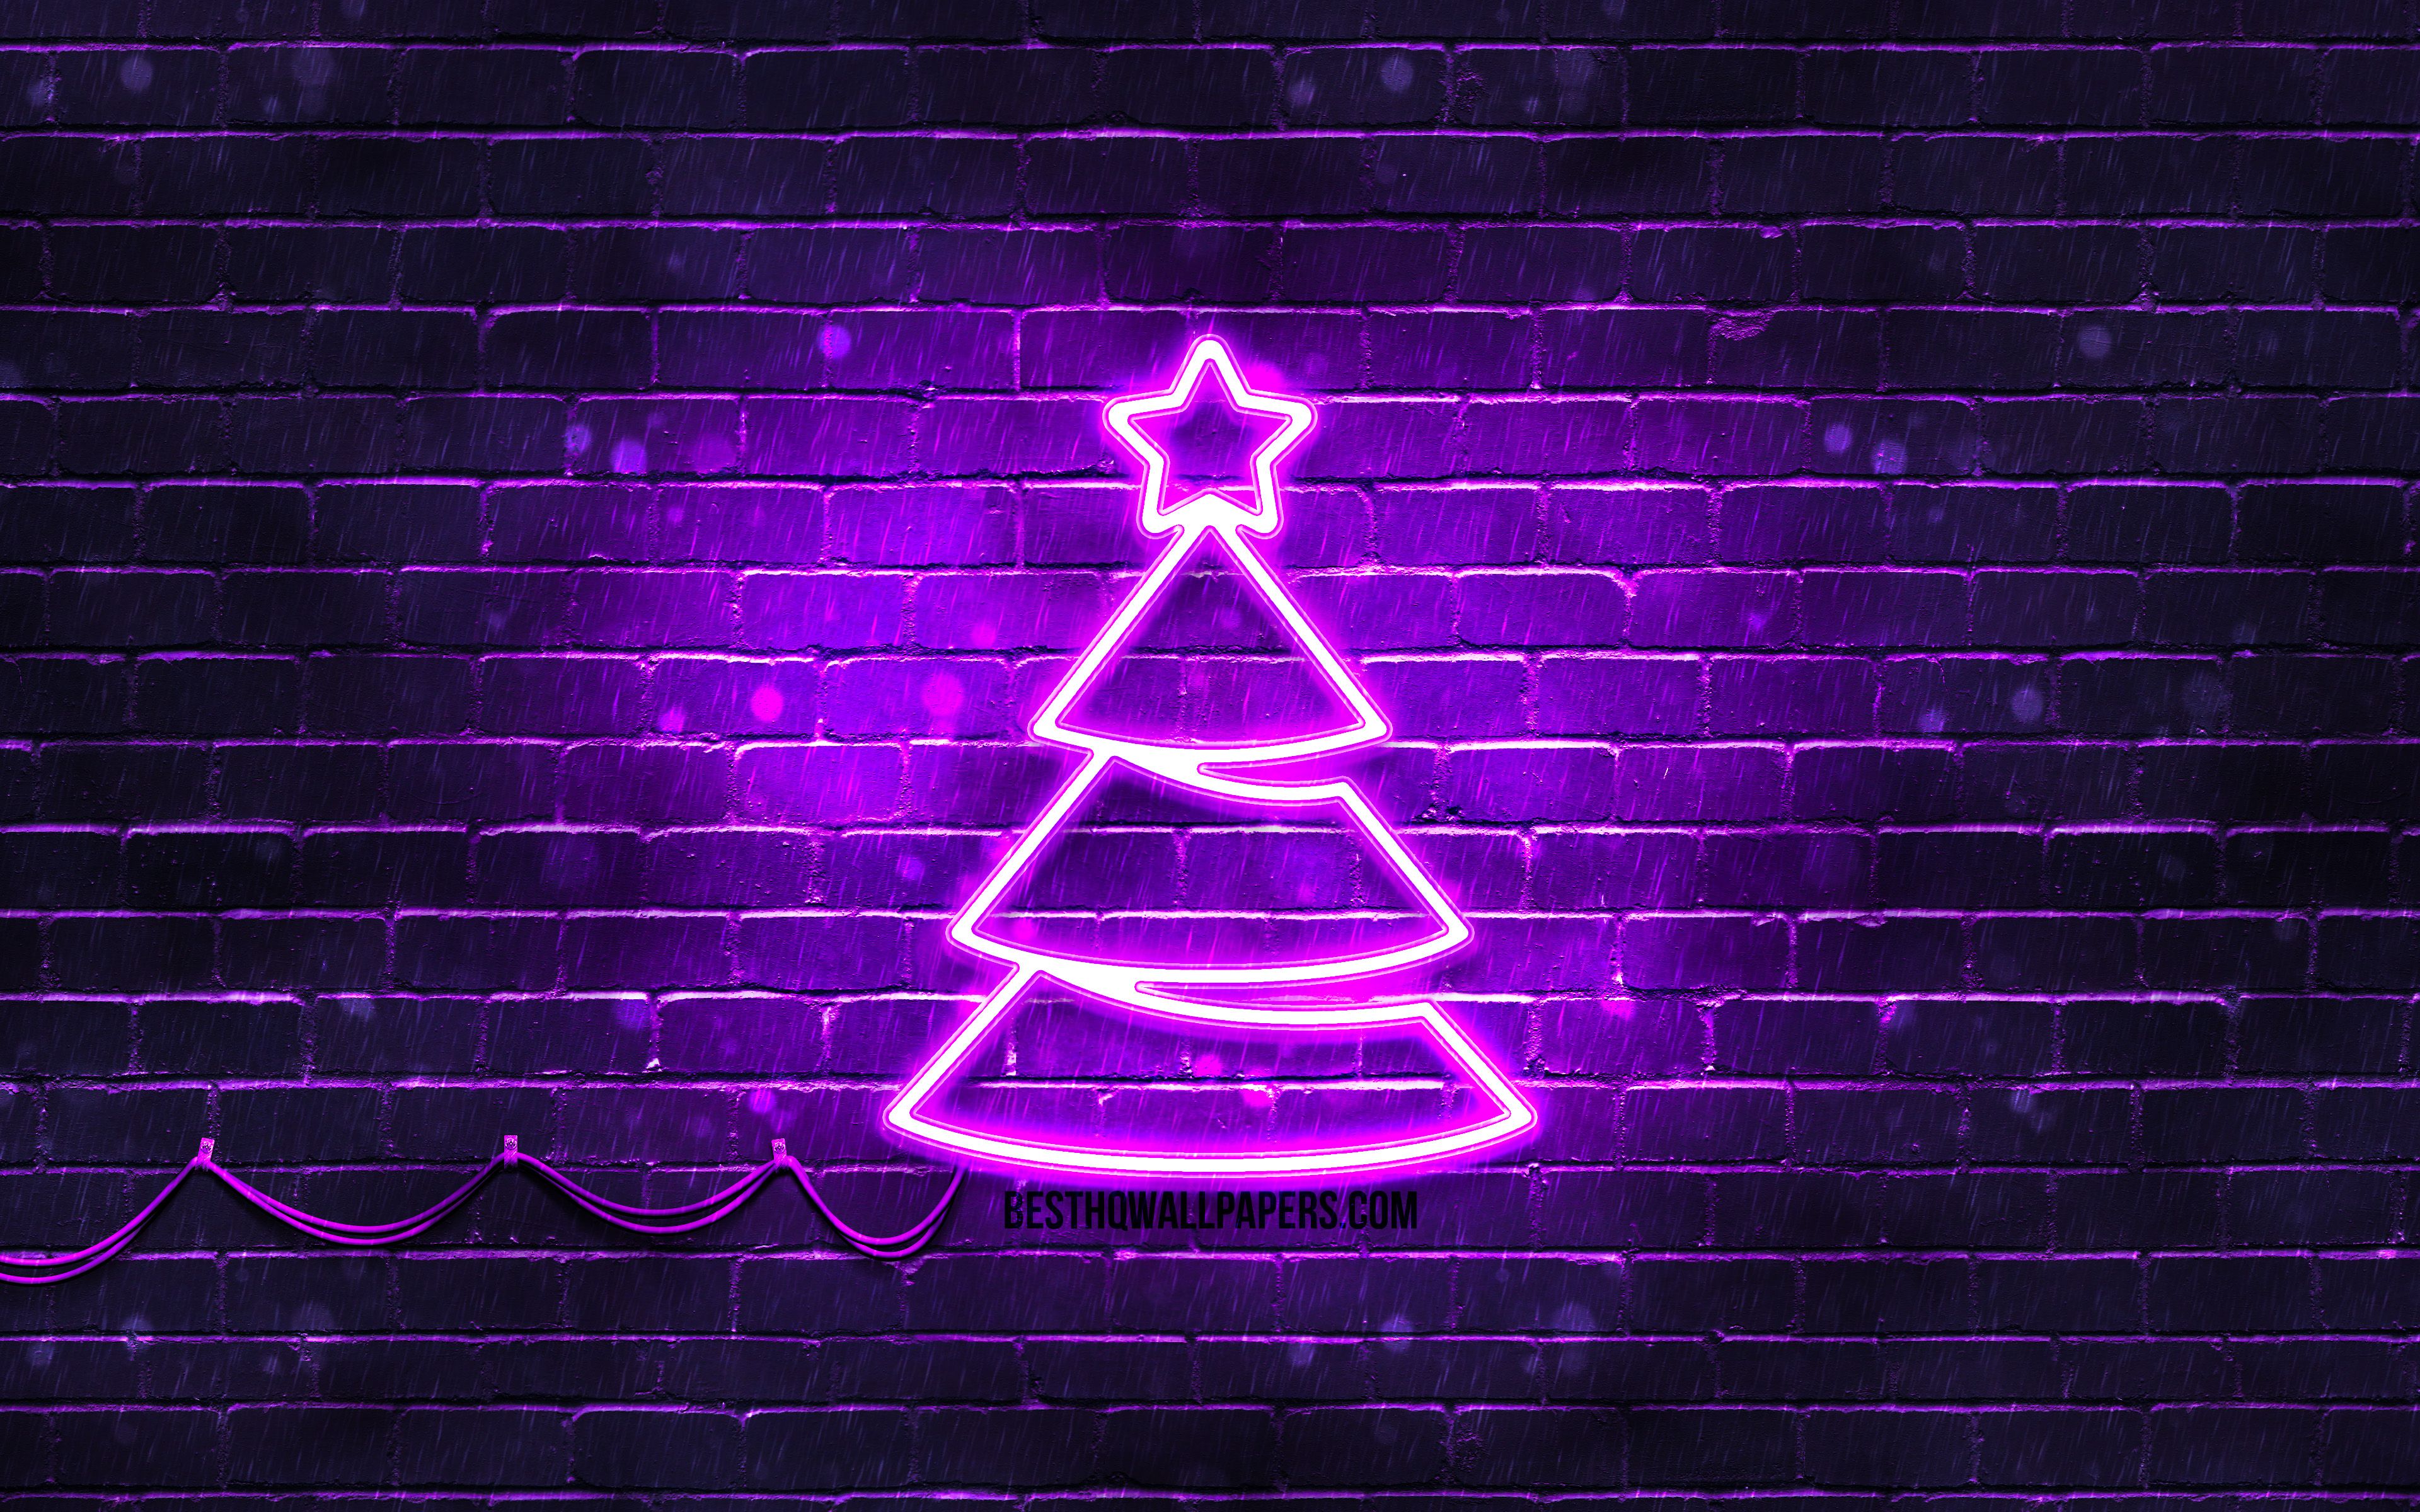 Download wallpaper Violet neon Christmas Tree, 4k, violet brickwall, Happy New Years Concept, Violet Christmas Tree, Xmas Trees, Christmas Trees for desktop with resolution 3840x2400. High Quality HD picture wallpaper